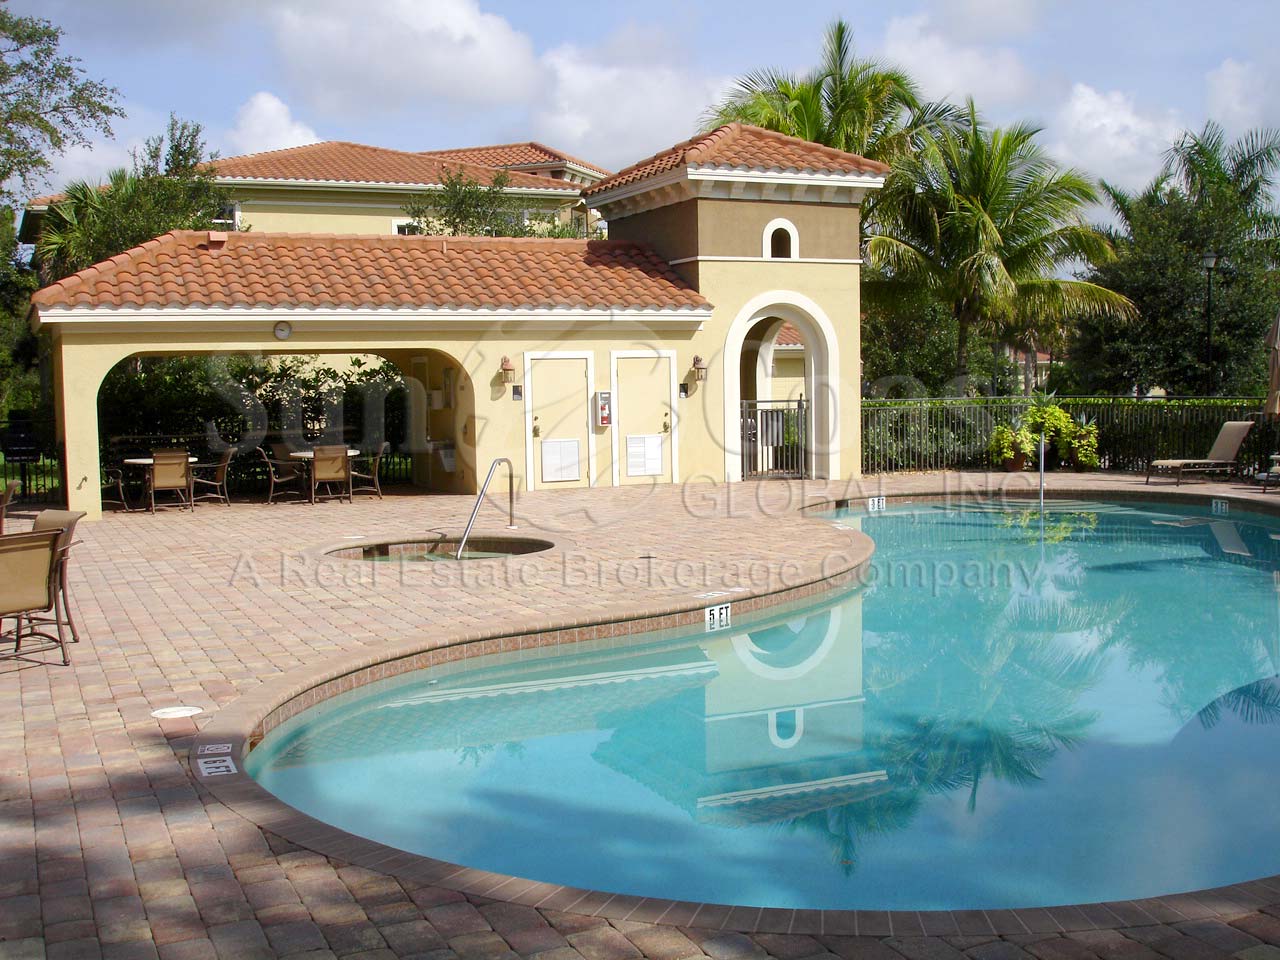 Calabria clubhouse, pool and spa